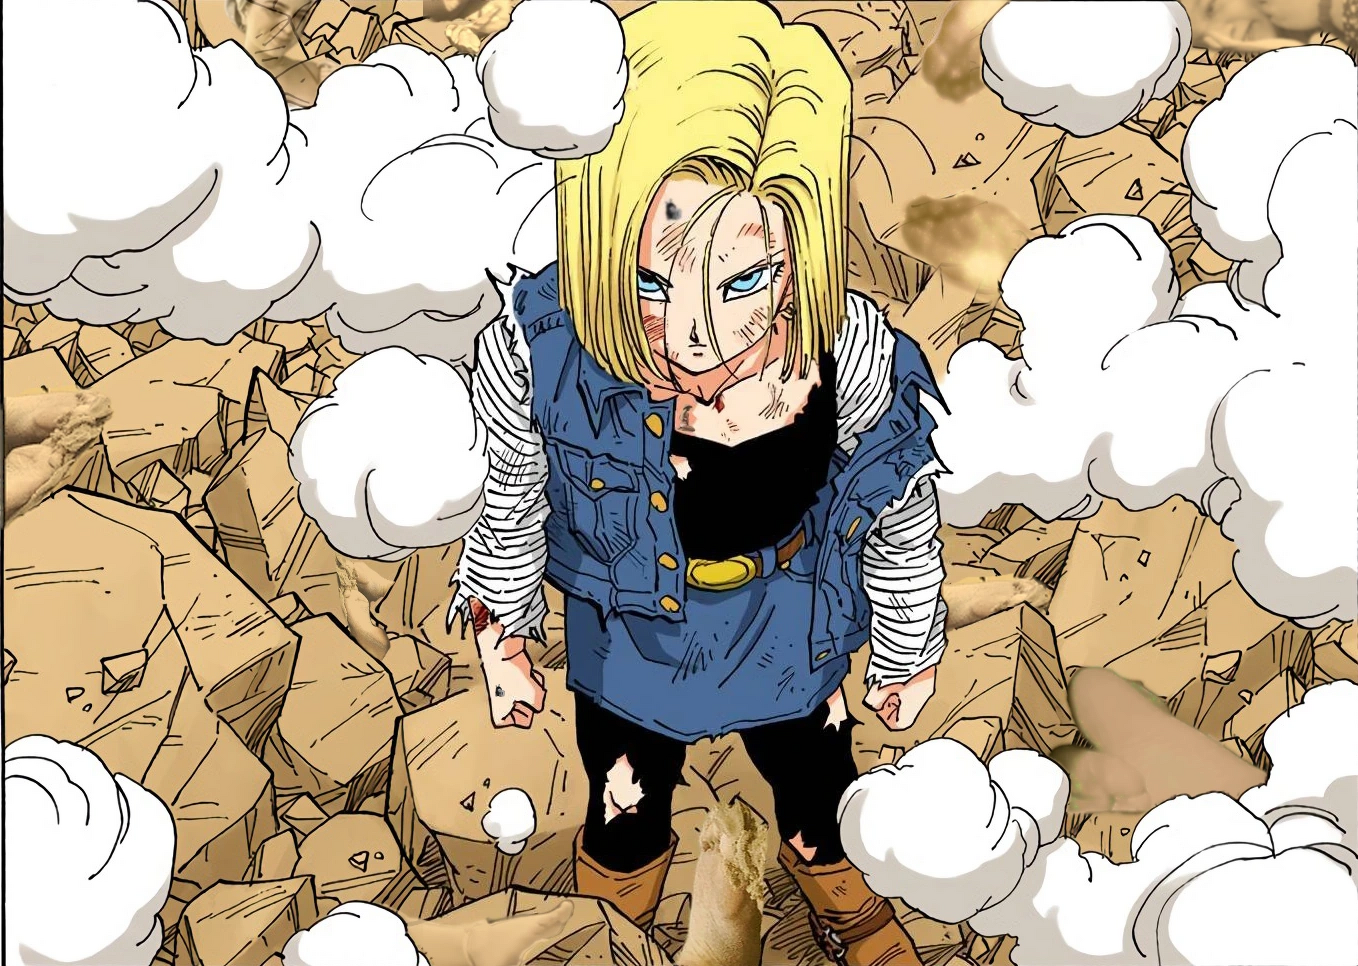 Android 18, Heroes Wiki